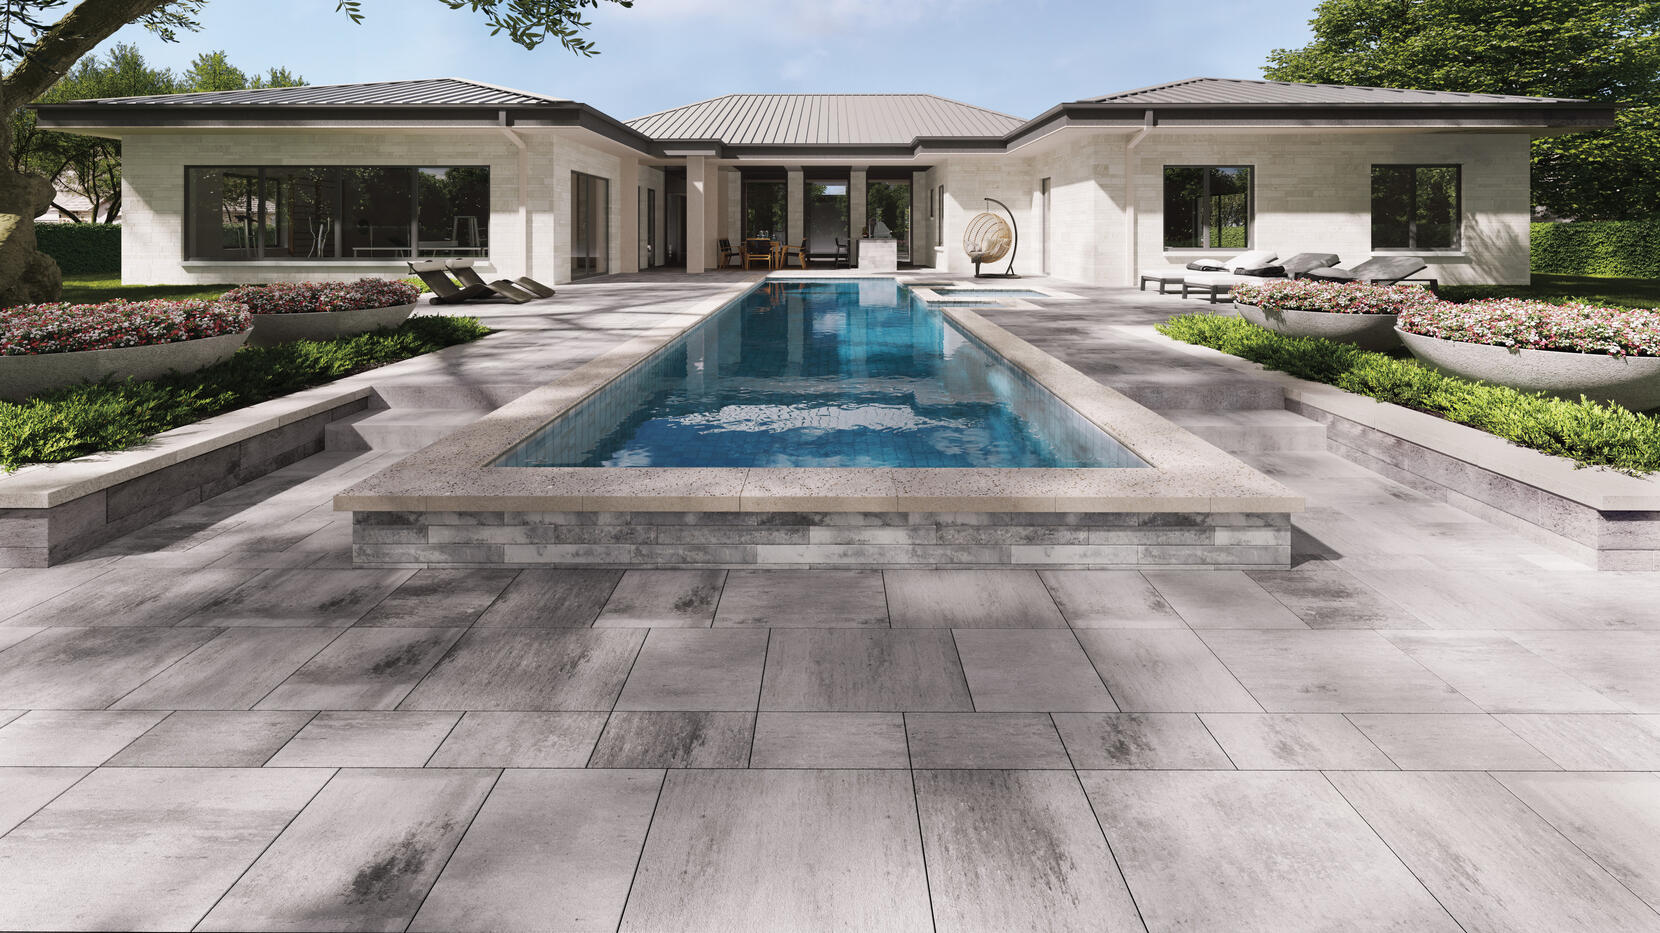 Modern house using Oaks Landscape products, pavers and walls